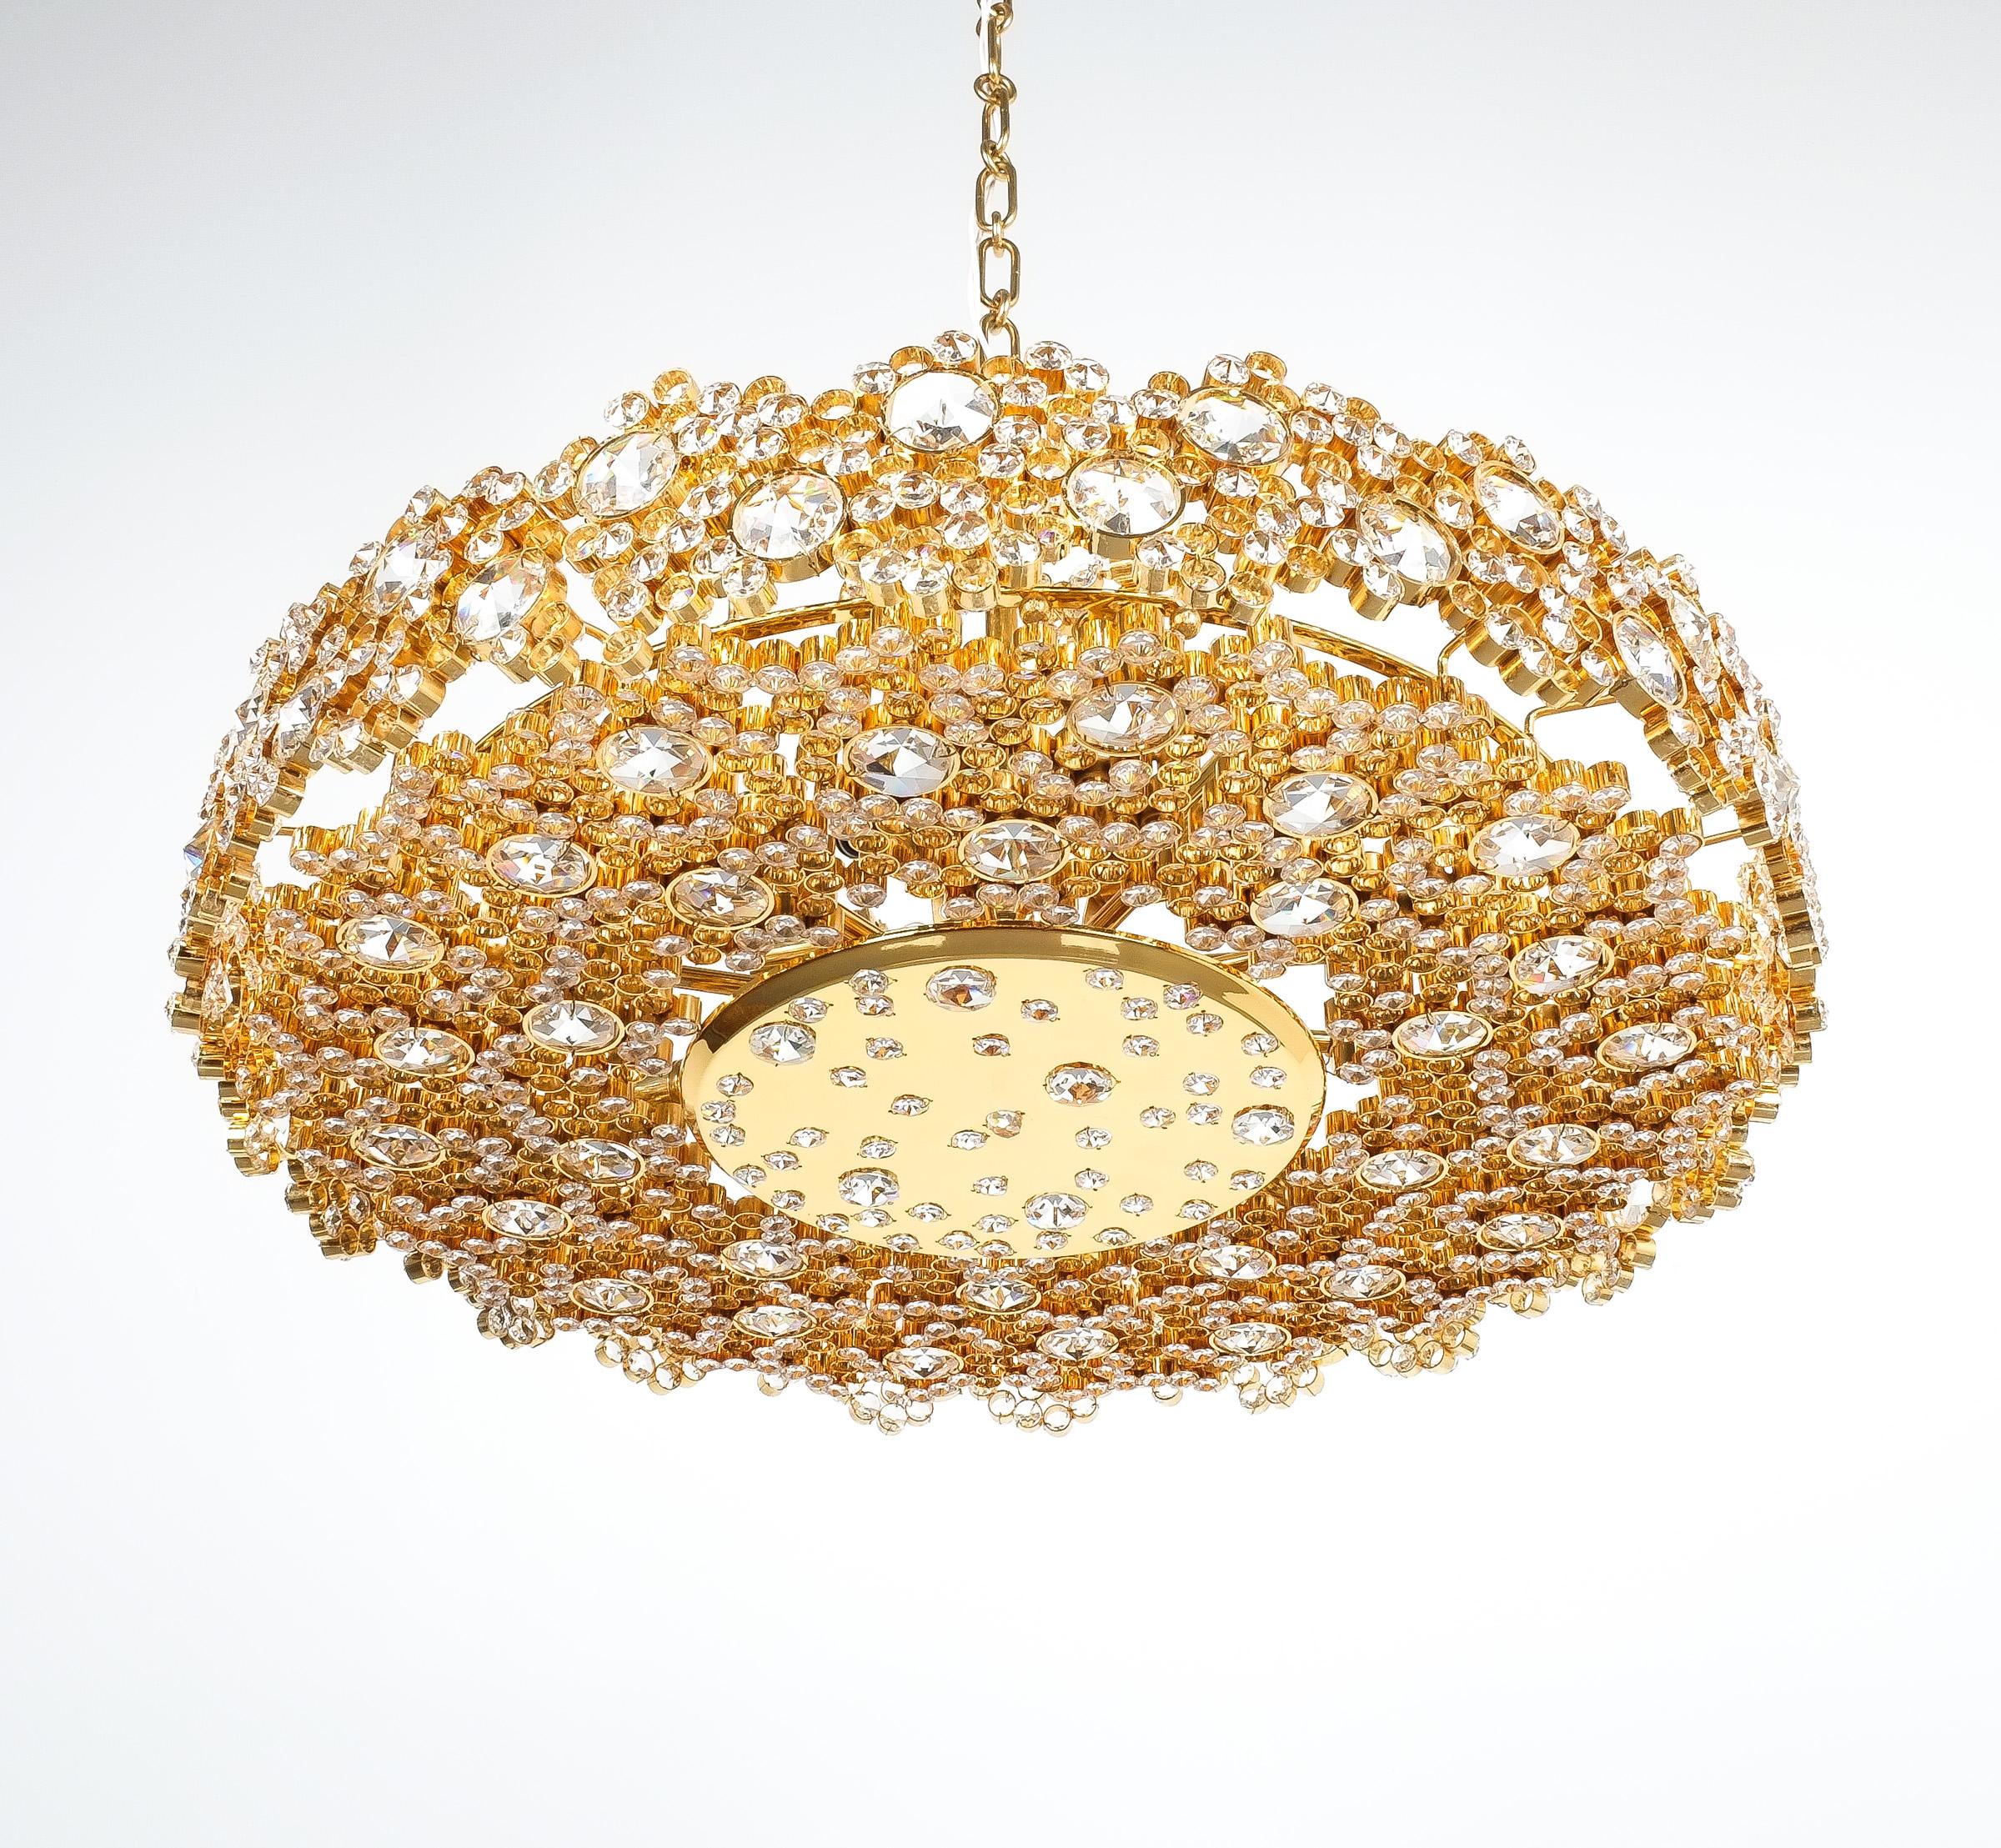 Palwa Crystal Glass Gold-Plated Brass Chandelier Refurbished Lamp 7